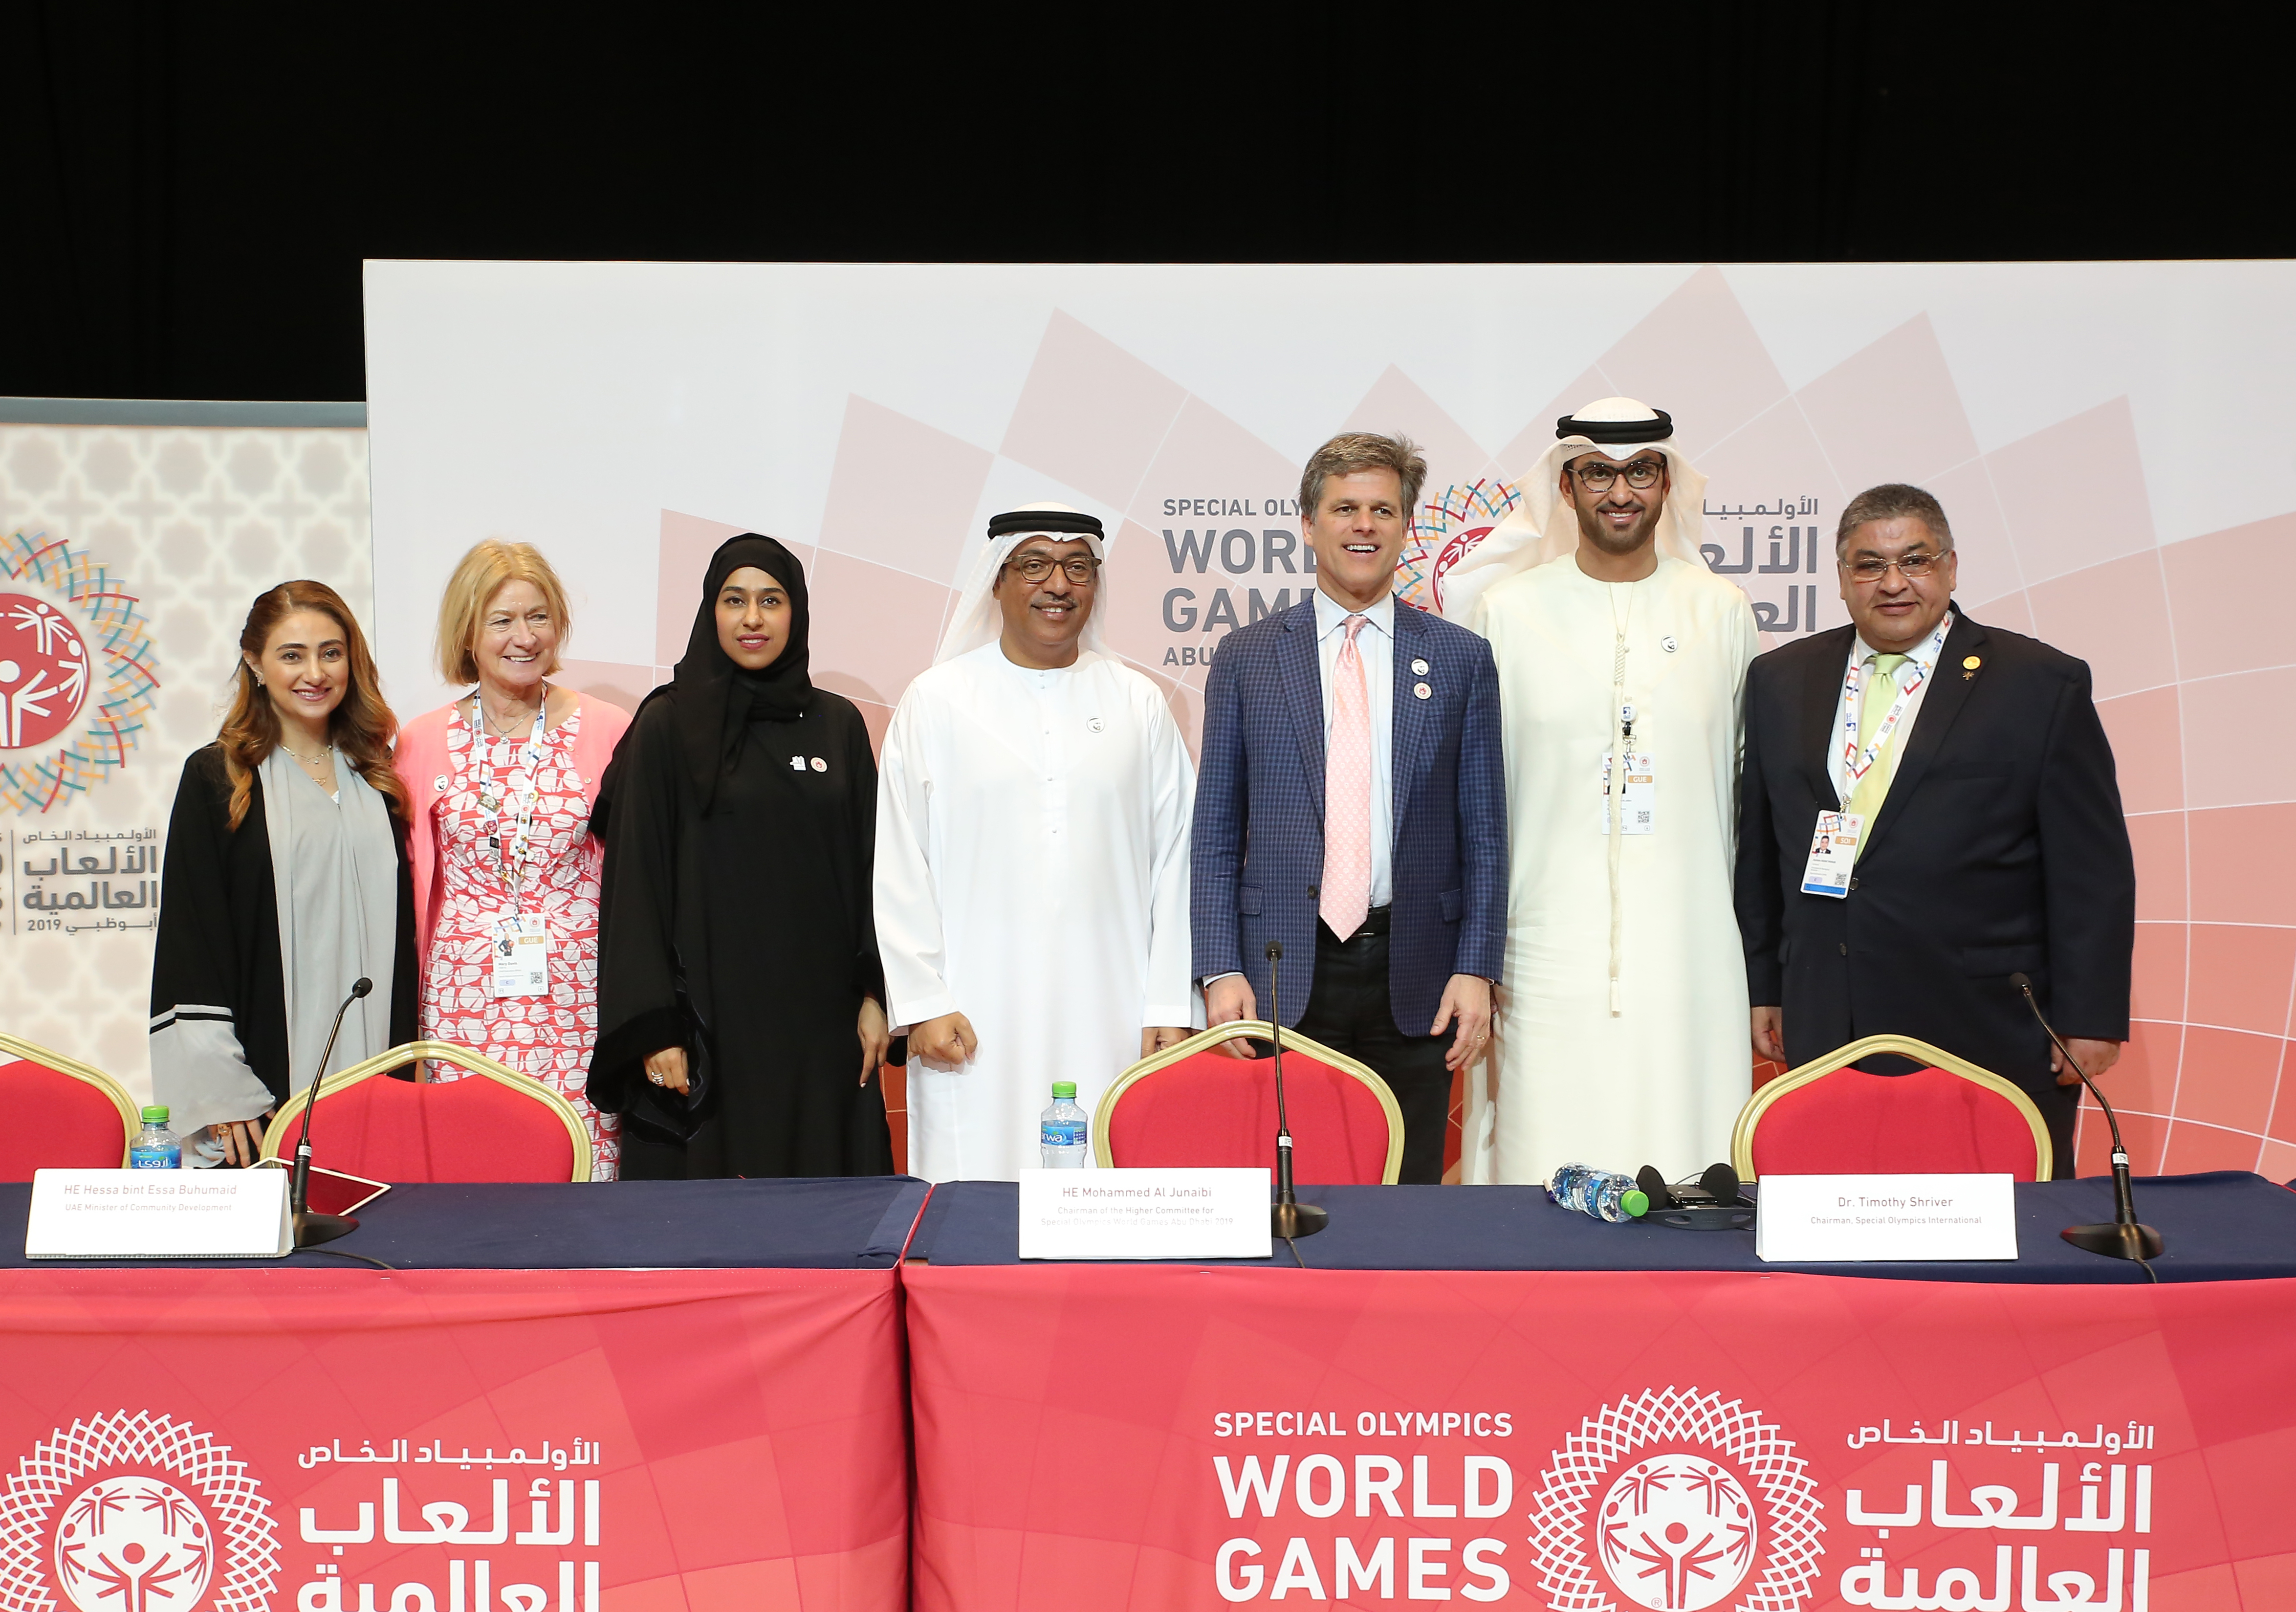 Special Olympics World Games Abu Dubai 2019 Celebrates Laying Foundation For Legacy Of Inclusion And A More Unified Tomorrow